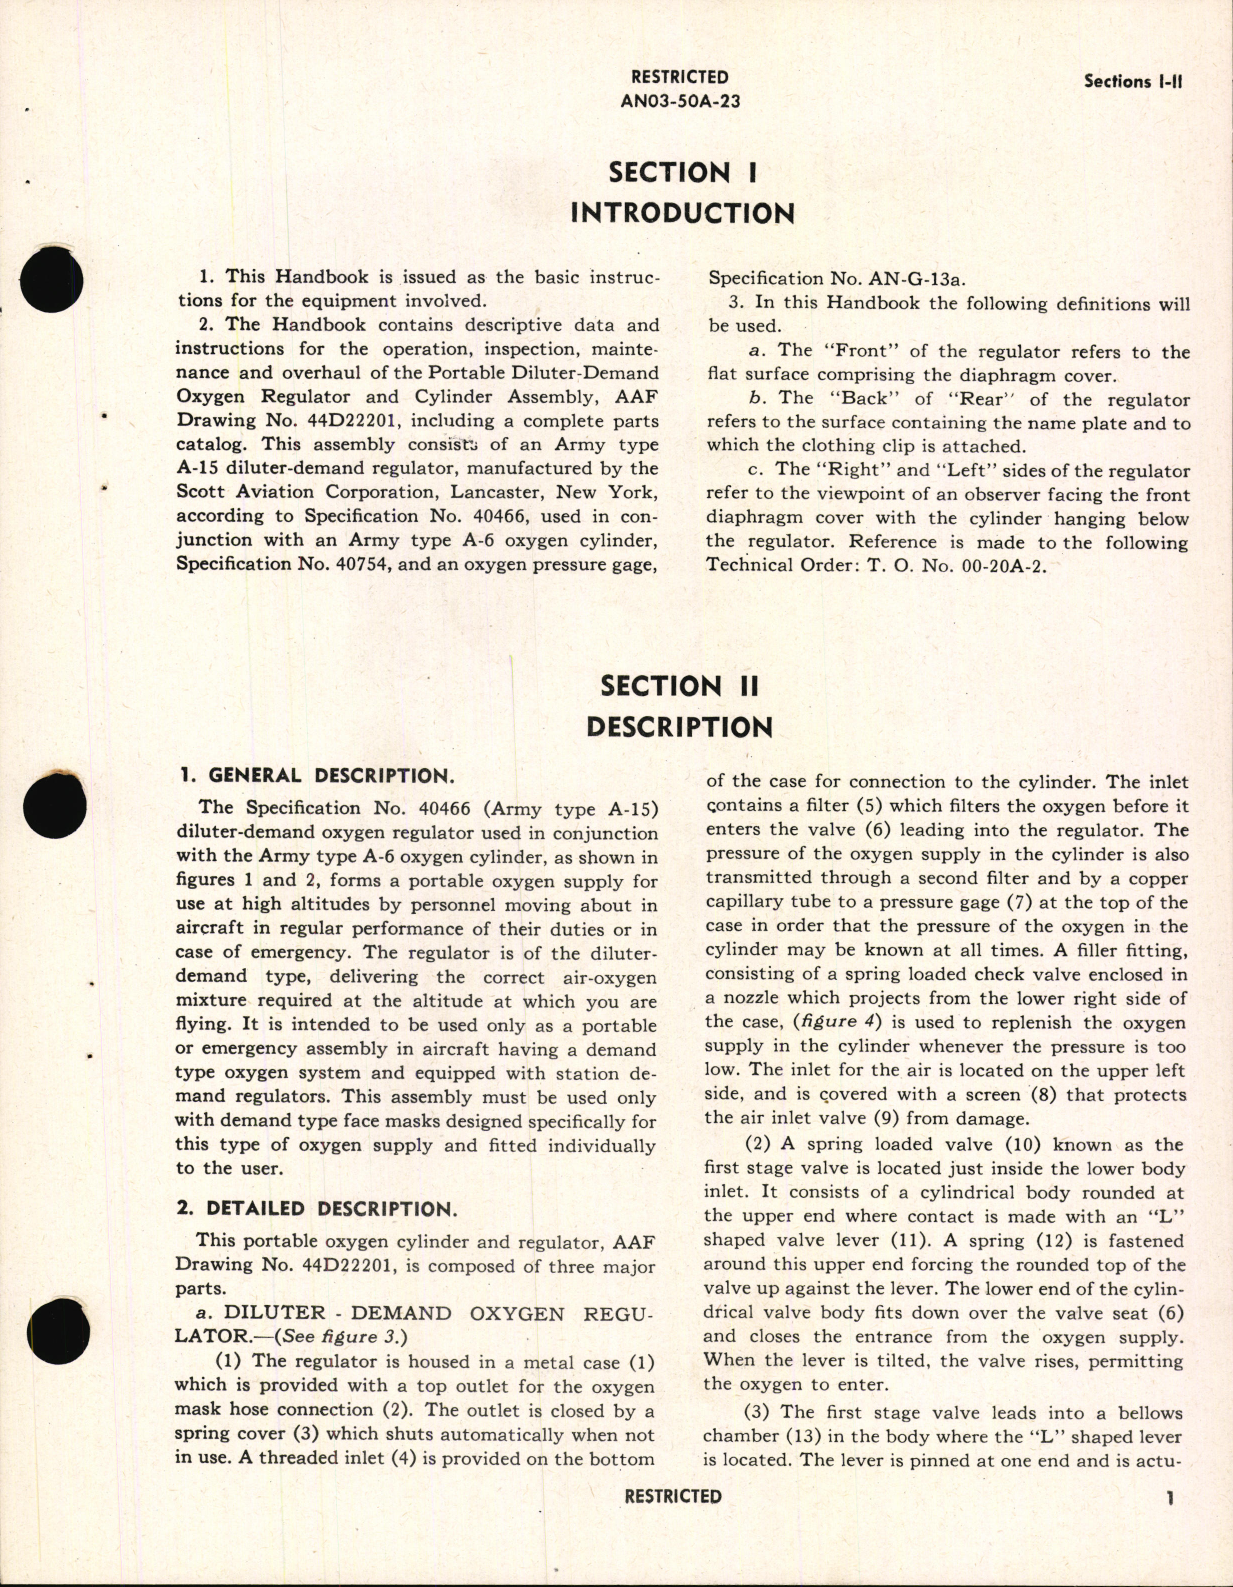 Sample page 5 from AirCorps Library document: Operation, Service and Overhaul Instructions for Portable Diluter Demand Oxygen Regulator Type A-15